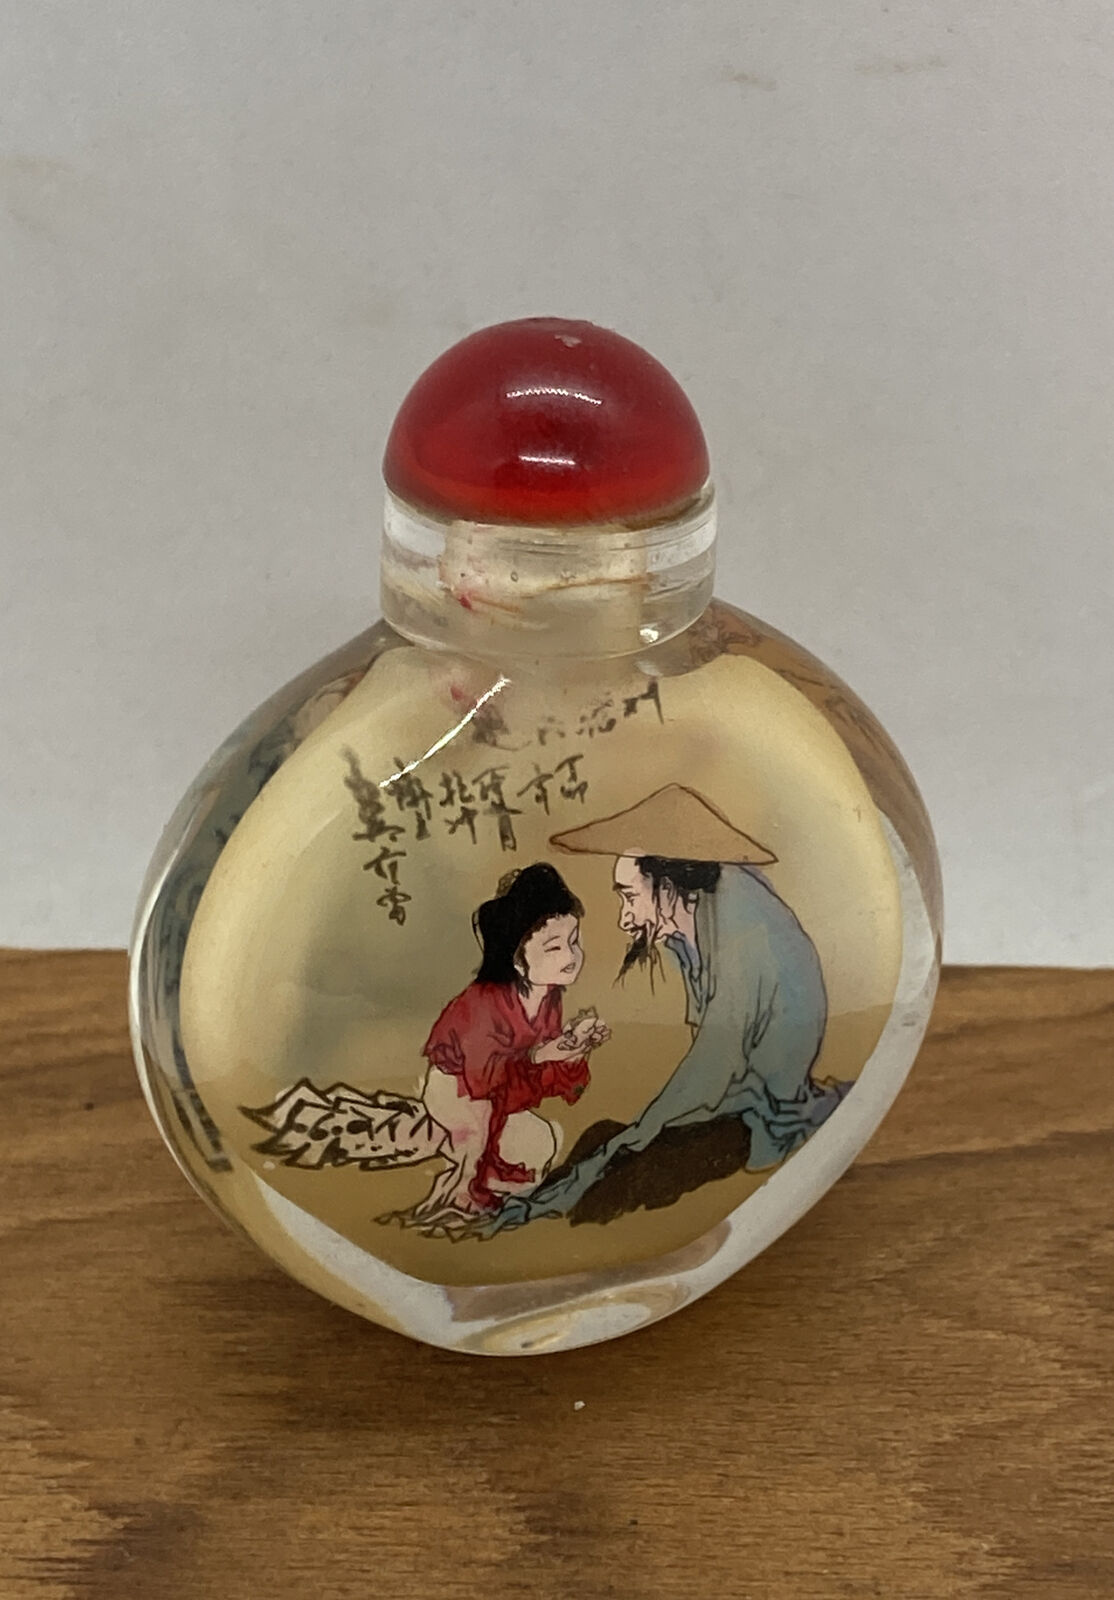 Exquisite Old Chinese Chinese glaze Hand Painted People snuff bottle 2-1/8” Tall